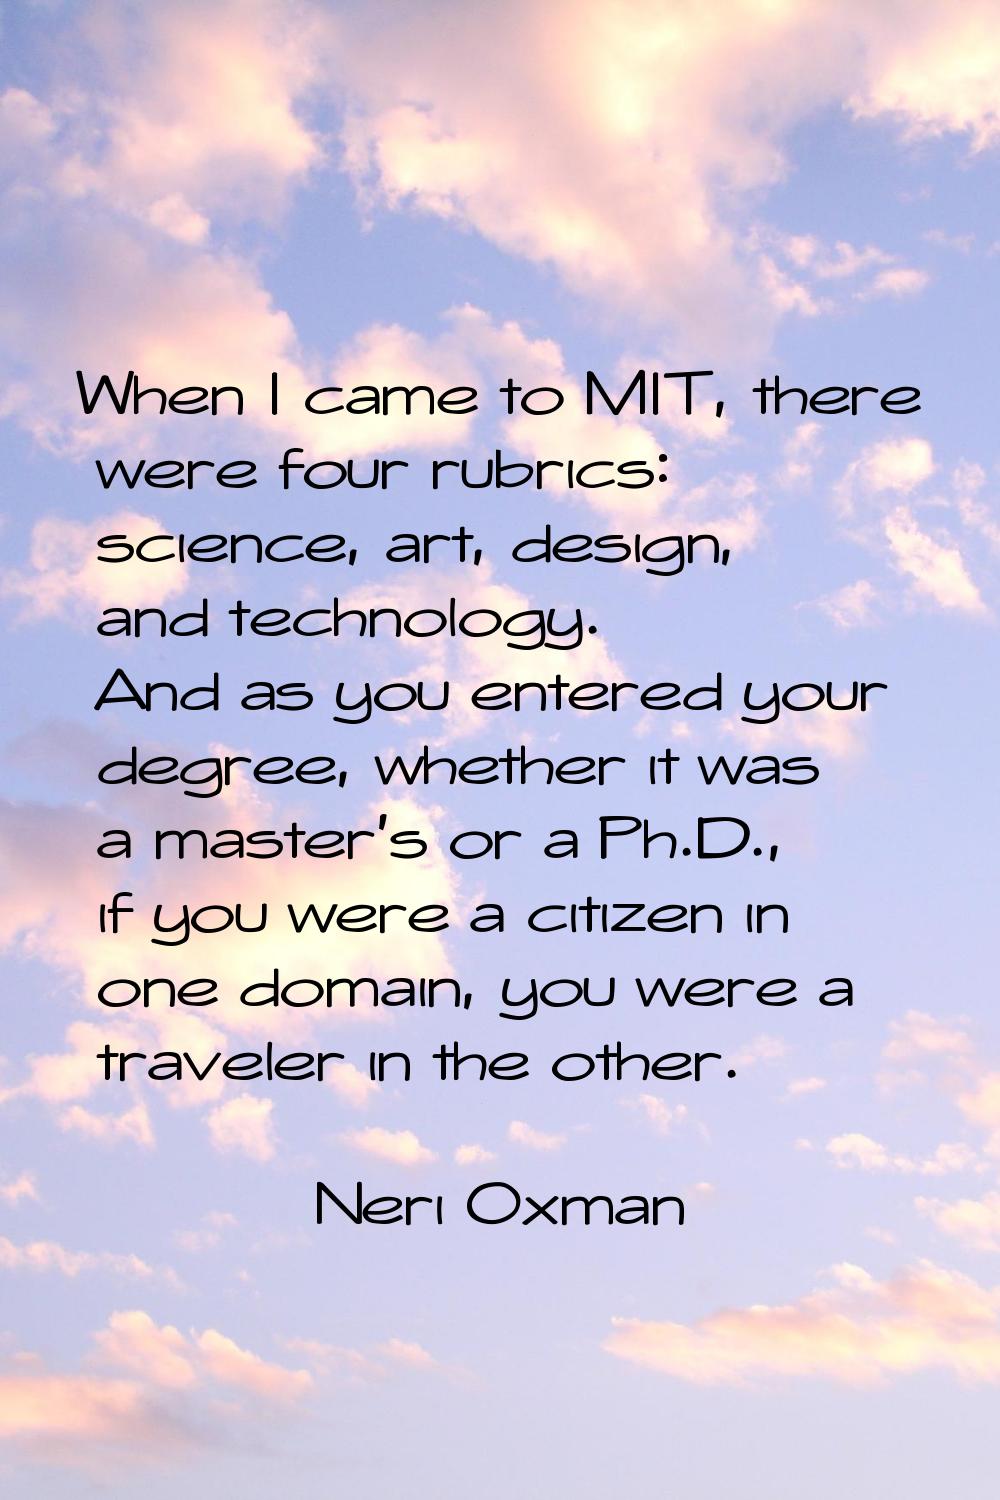 When I came to MIT, there were four rubrics: science, art, design, and technology. And as you enter